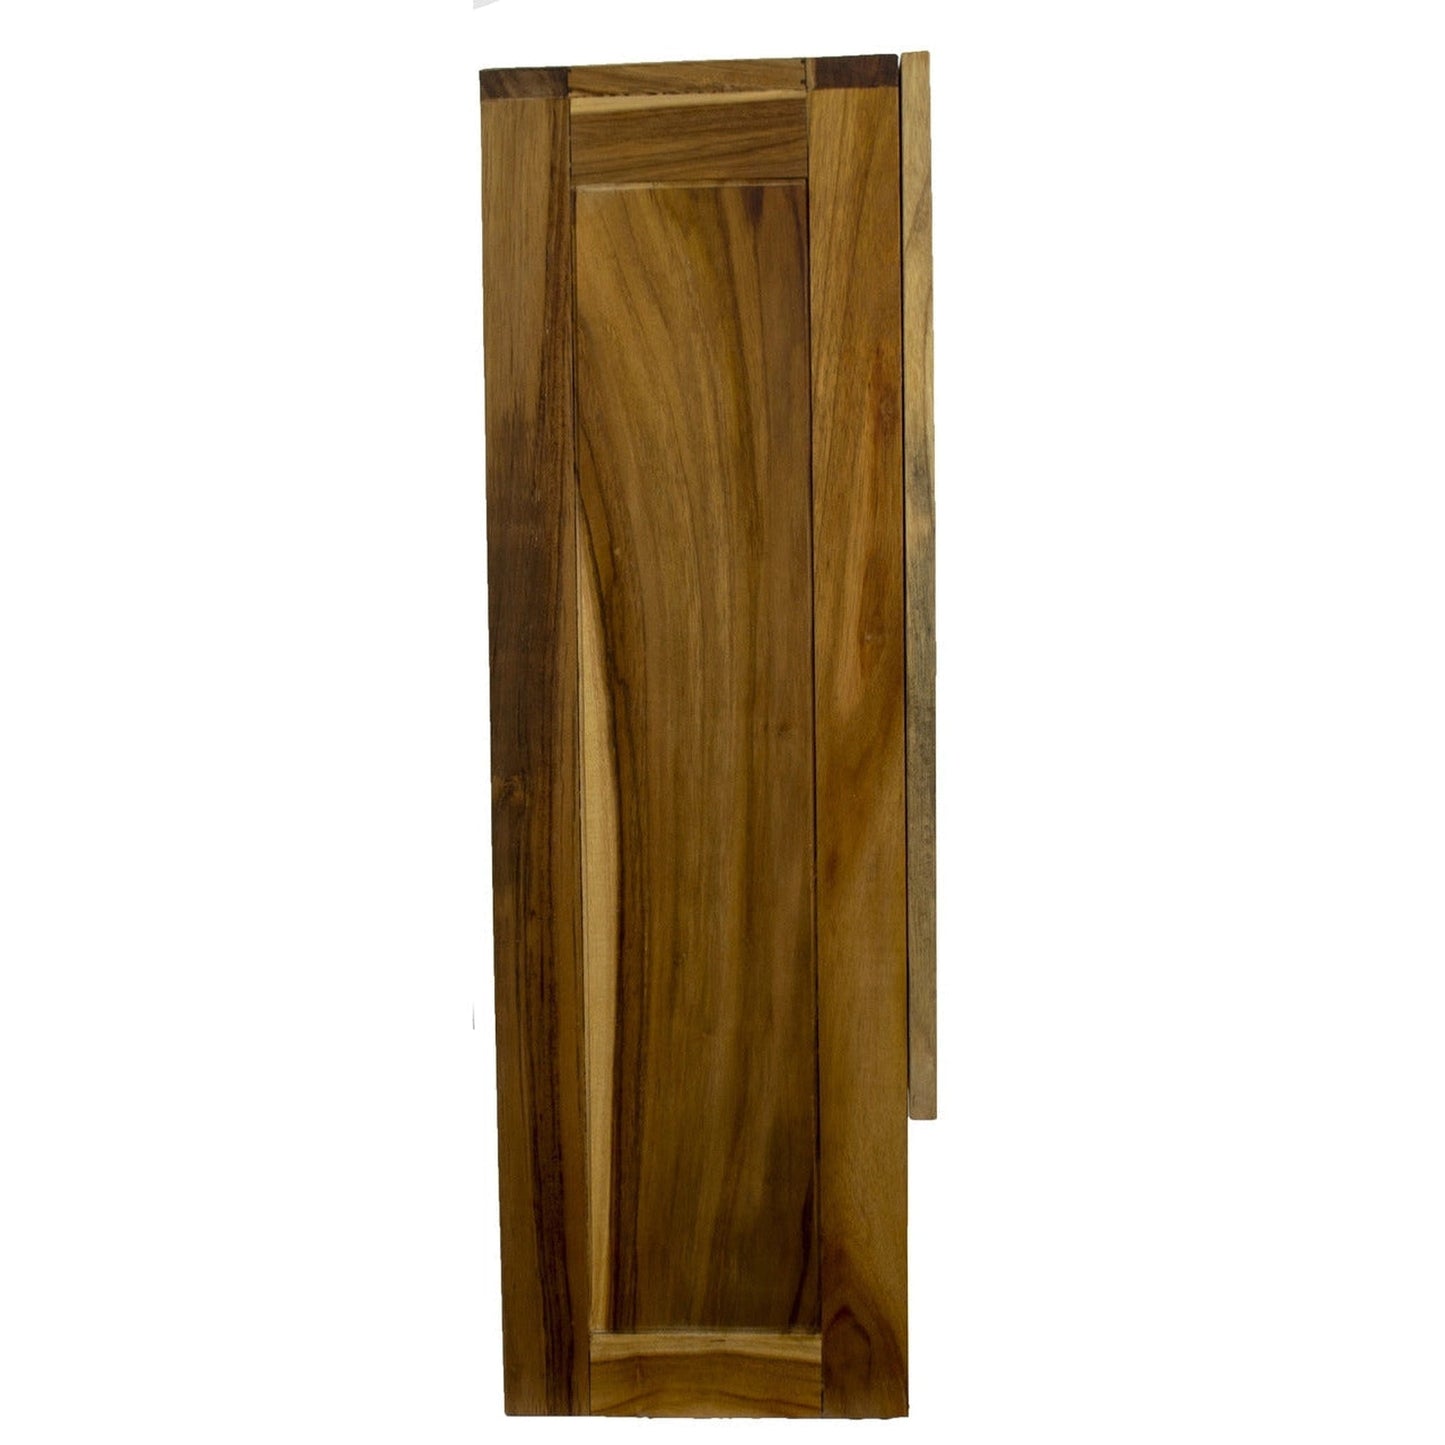 EcoDecors Curvature 24" EarthyTeak Solid Teak Wood Fully Assembled Wall Cabinet